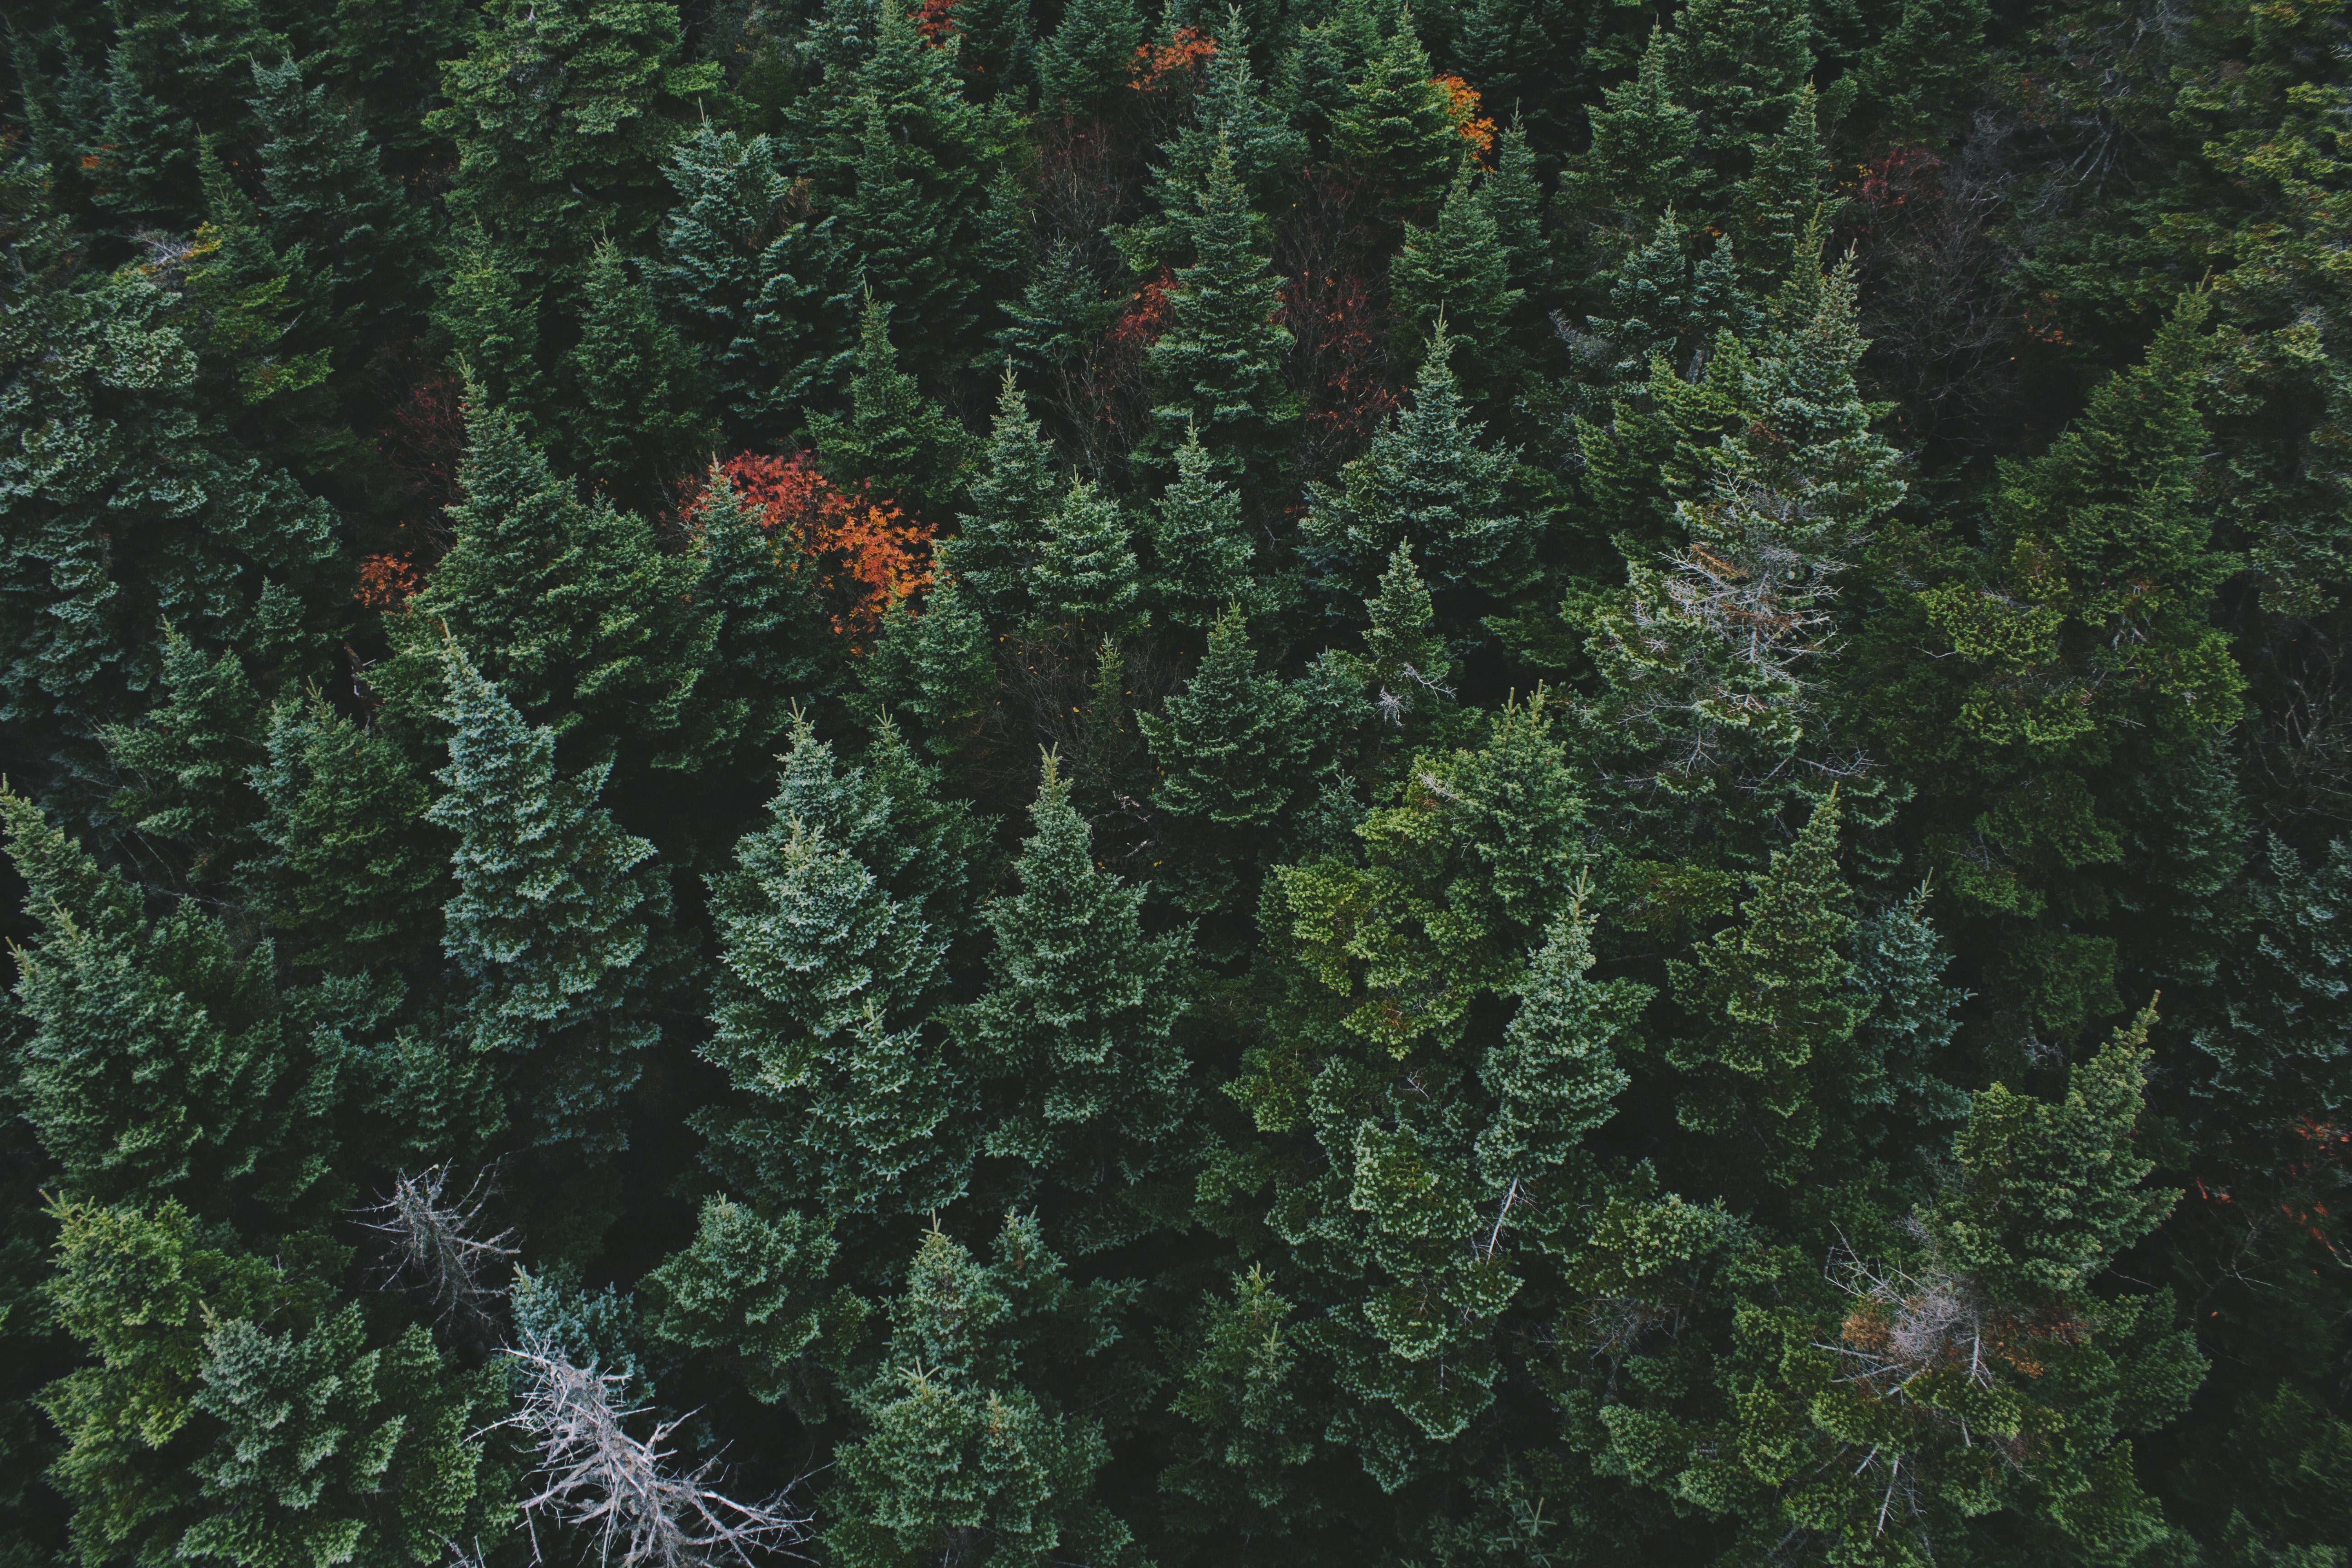 Ariel photo of a forest